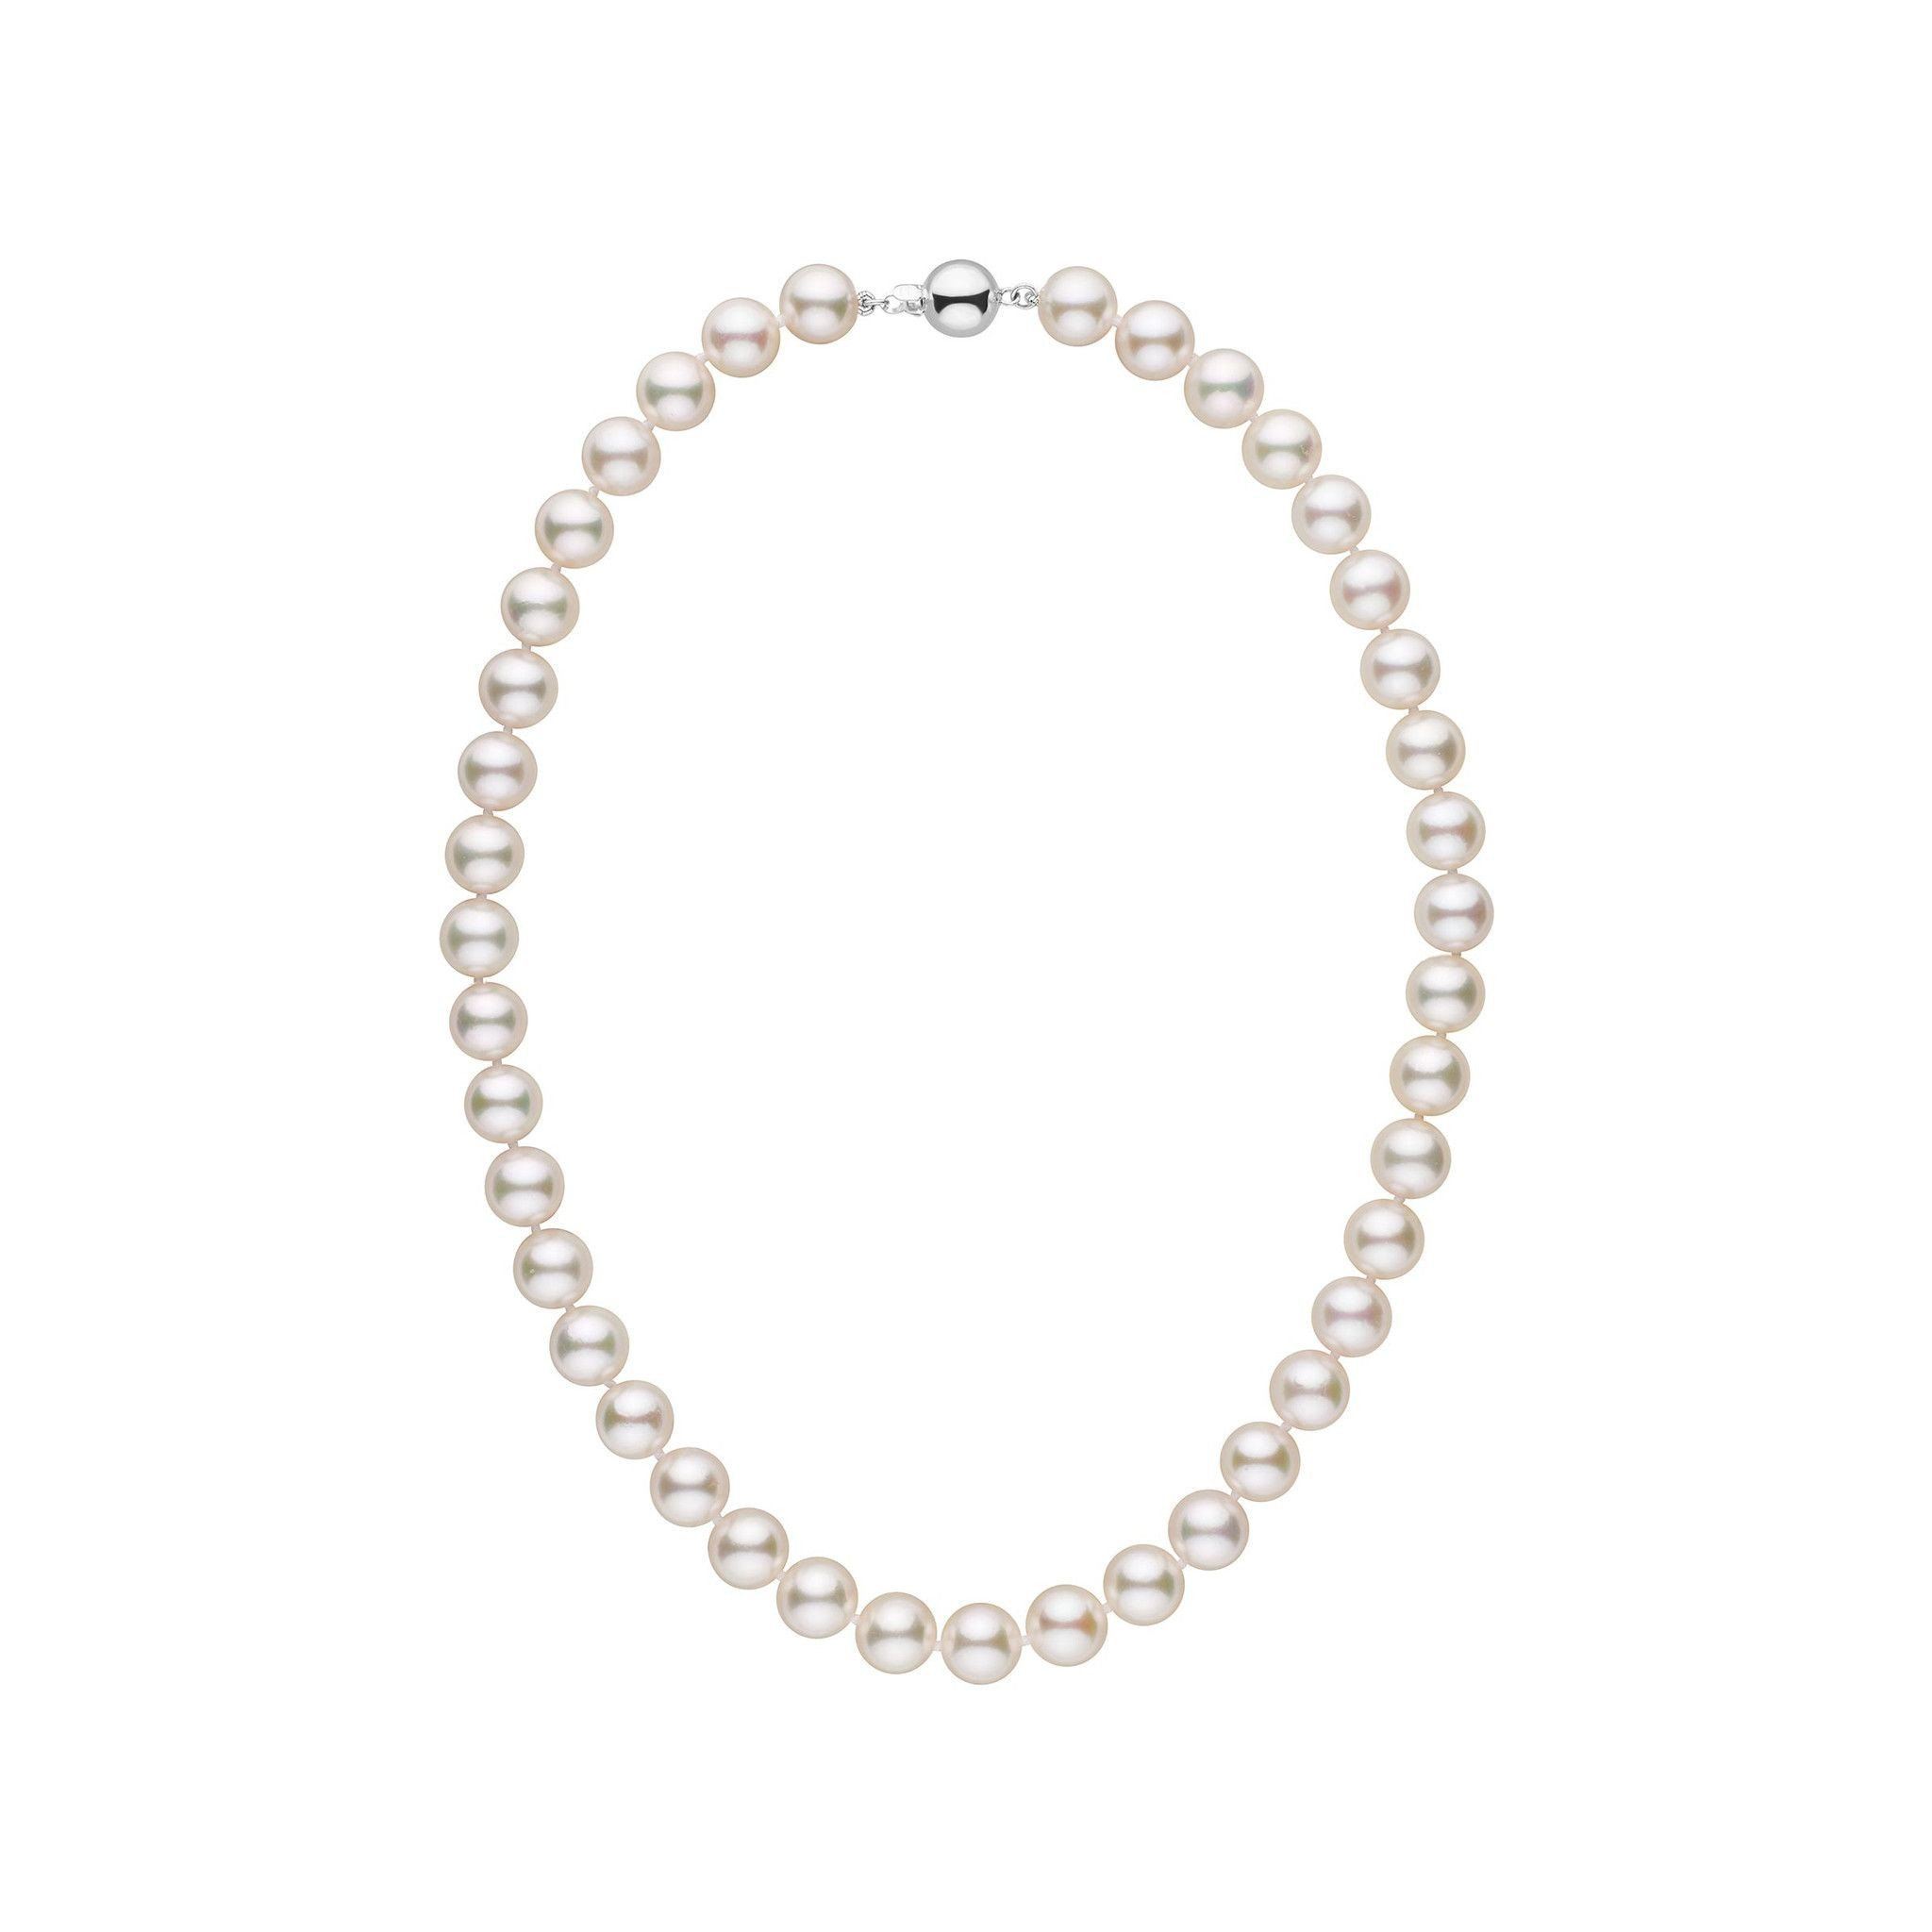 9.0-9.5 mm 16 Inch AA+ White Akoya Pearl Necklace white gold